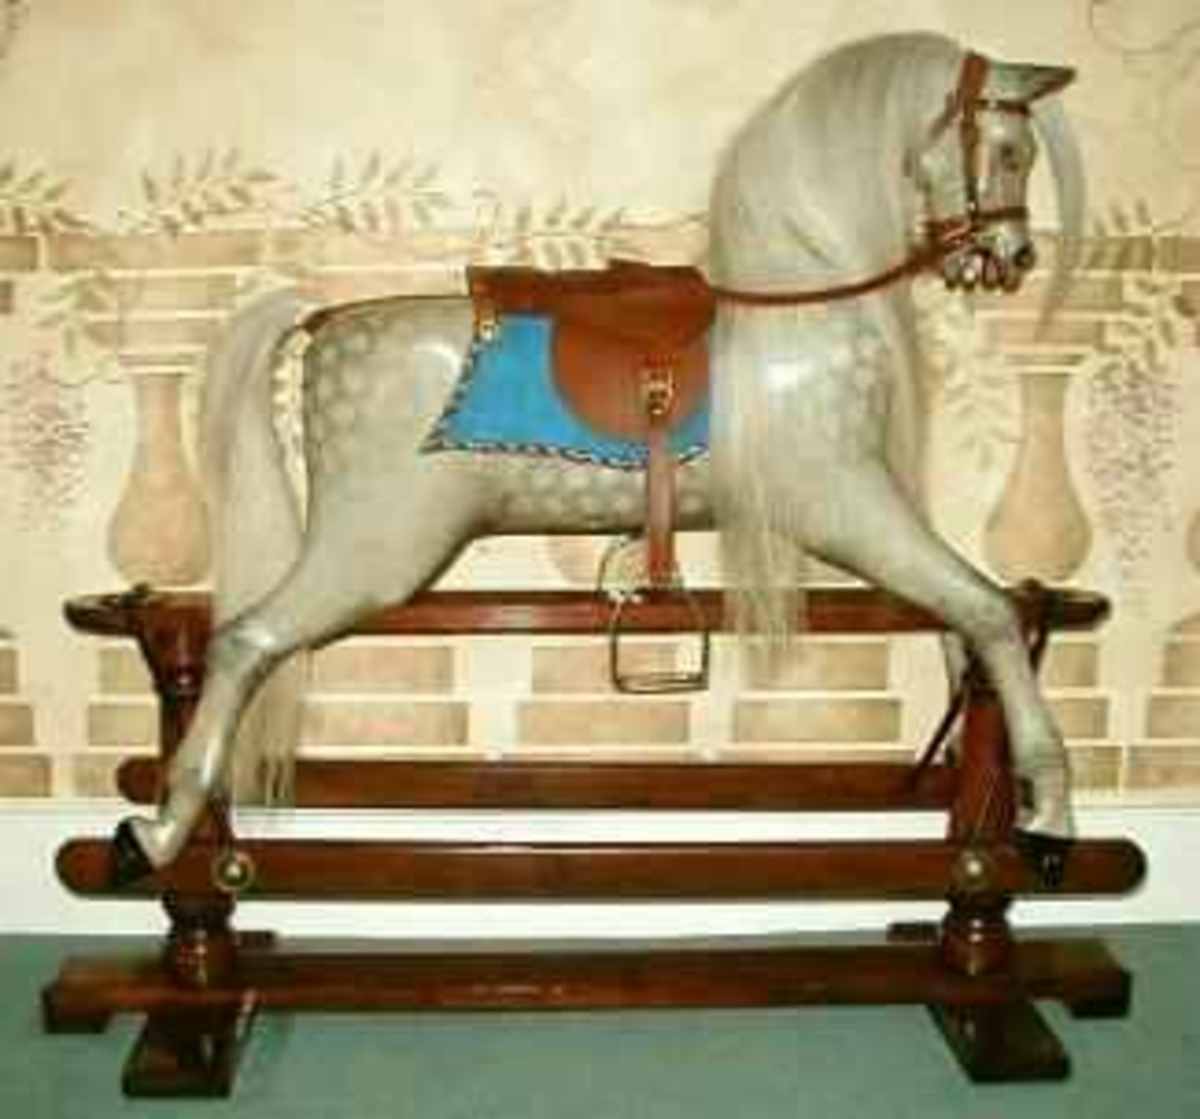 i-want-to-buy-an-antique-rocking-horse